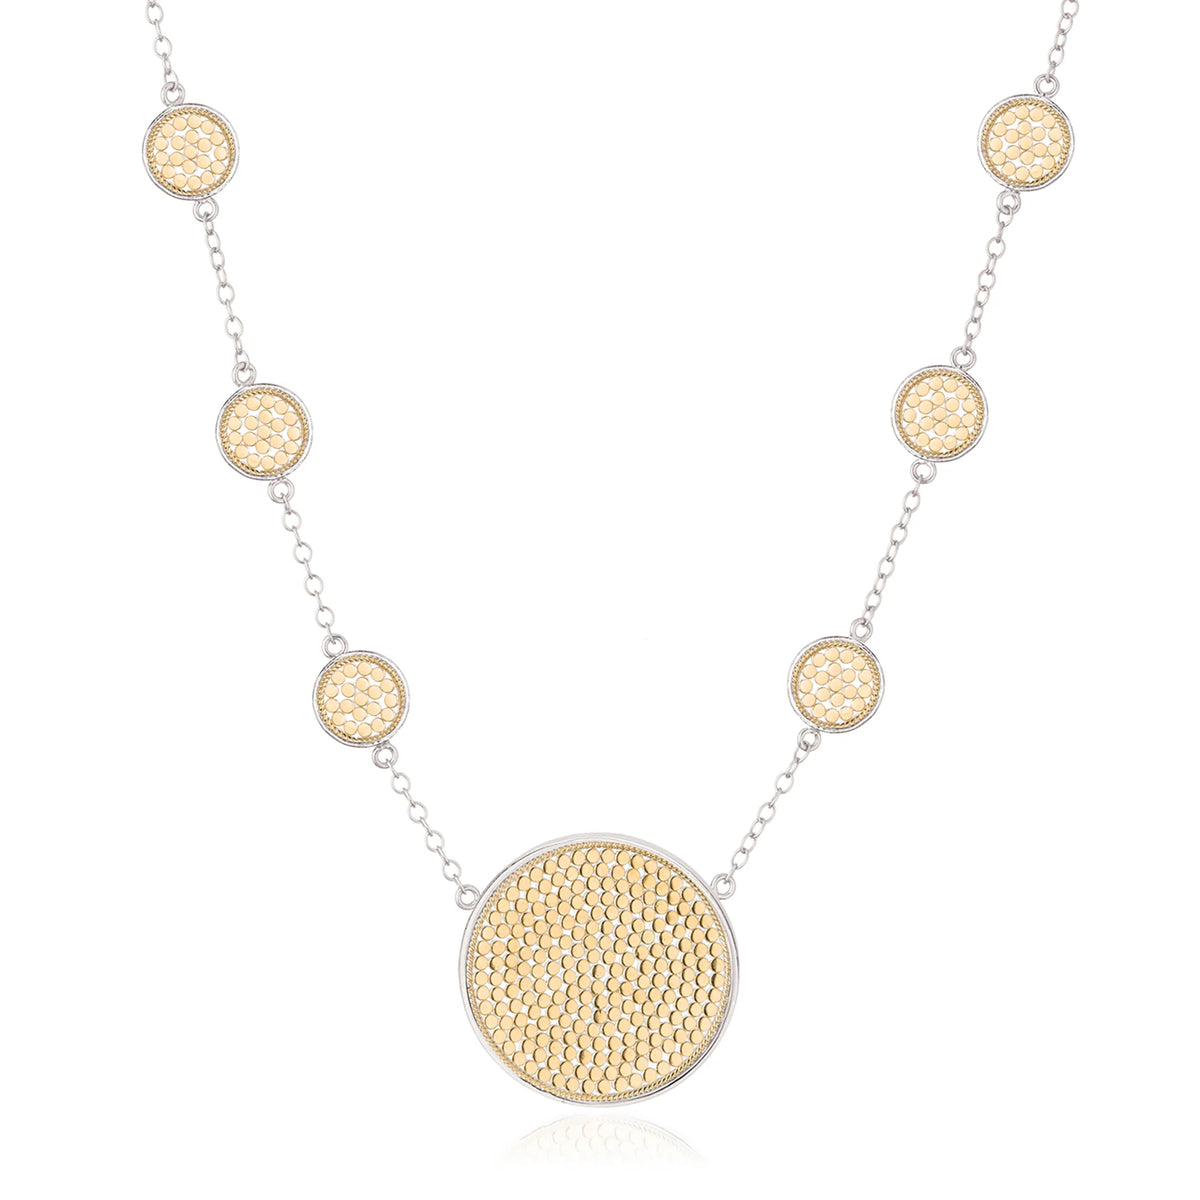 Gold and silver station necklace with small circular dotted discs and a large central disc with mutliple small gold dots